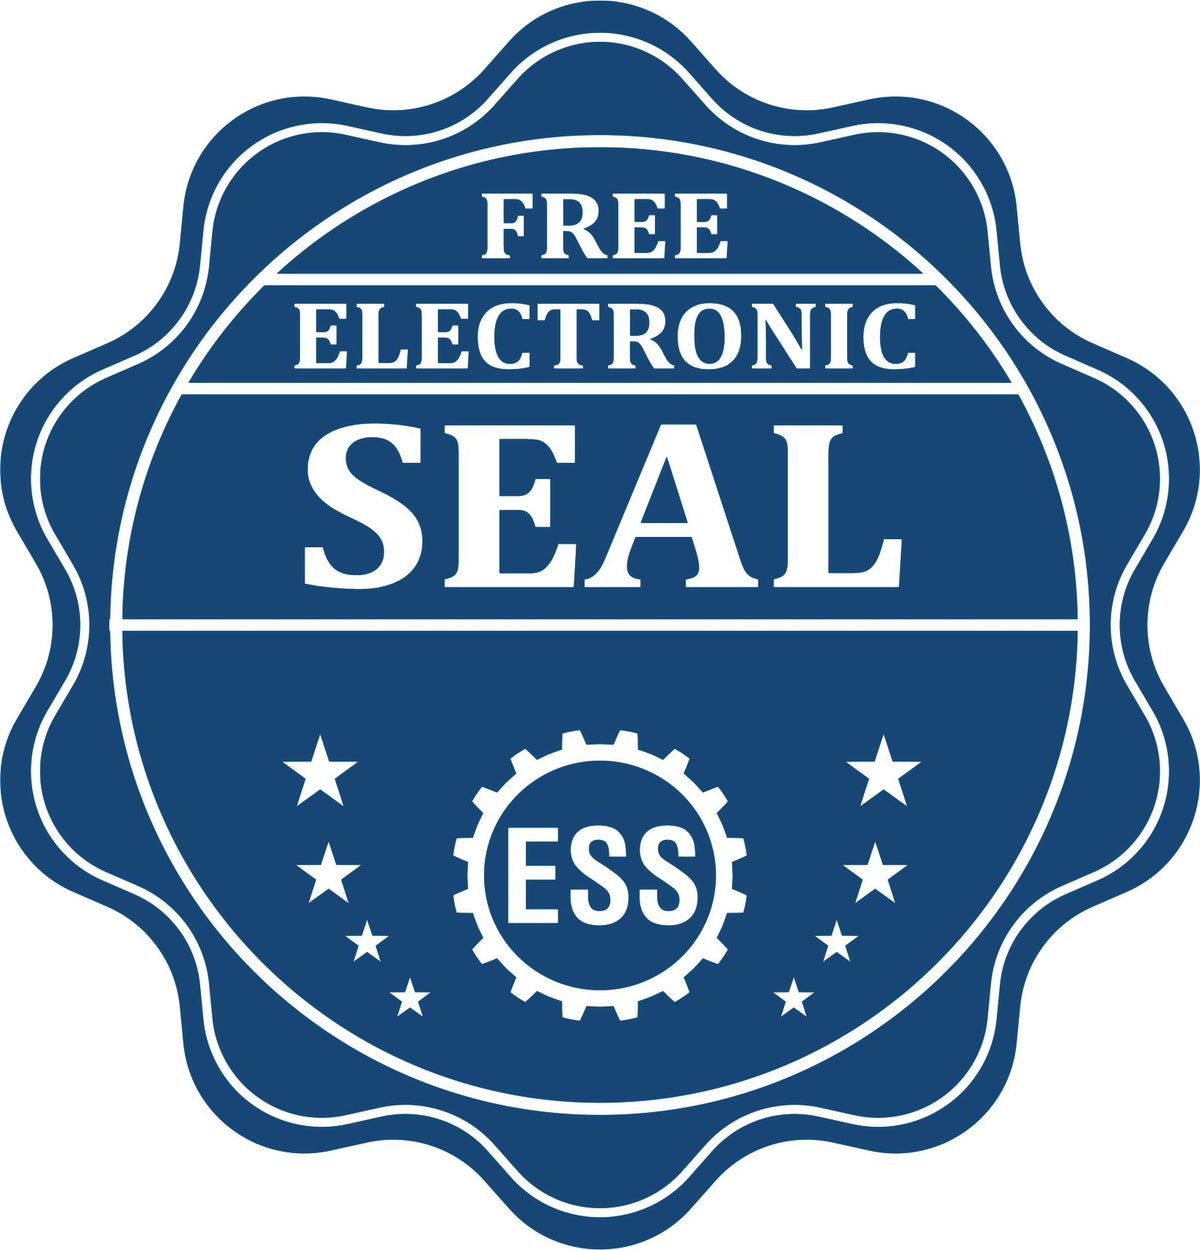 A badge showing a free electronic seal for the Heavy Duty Cast Iron Kansas Land Surveyor Seal Embosser with stars and the ESS gear on the emblem.